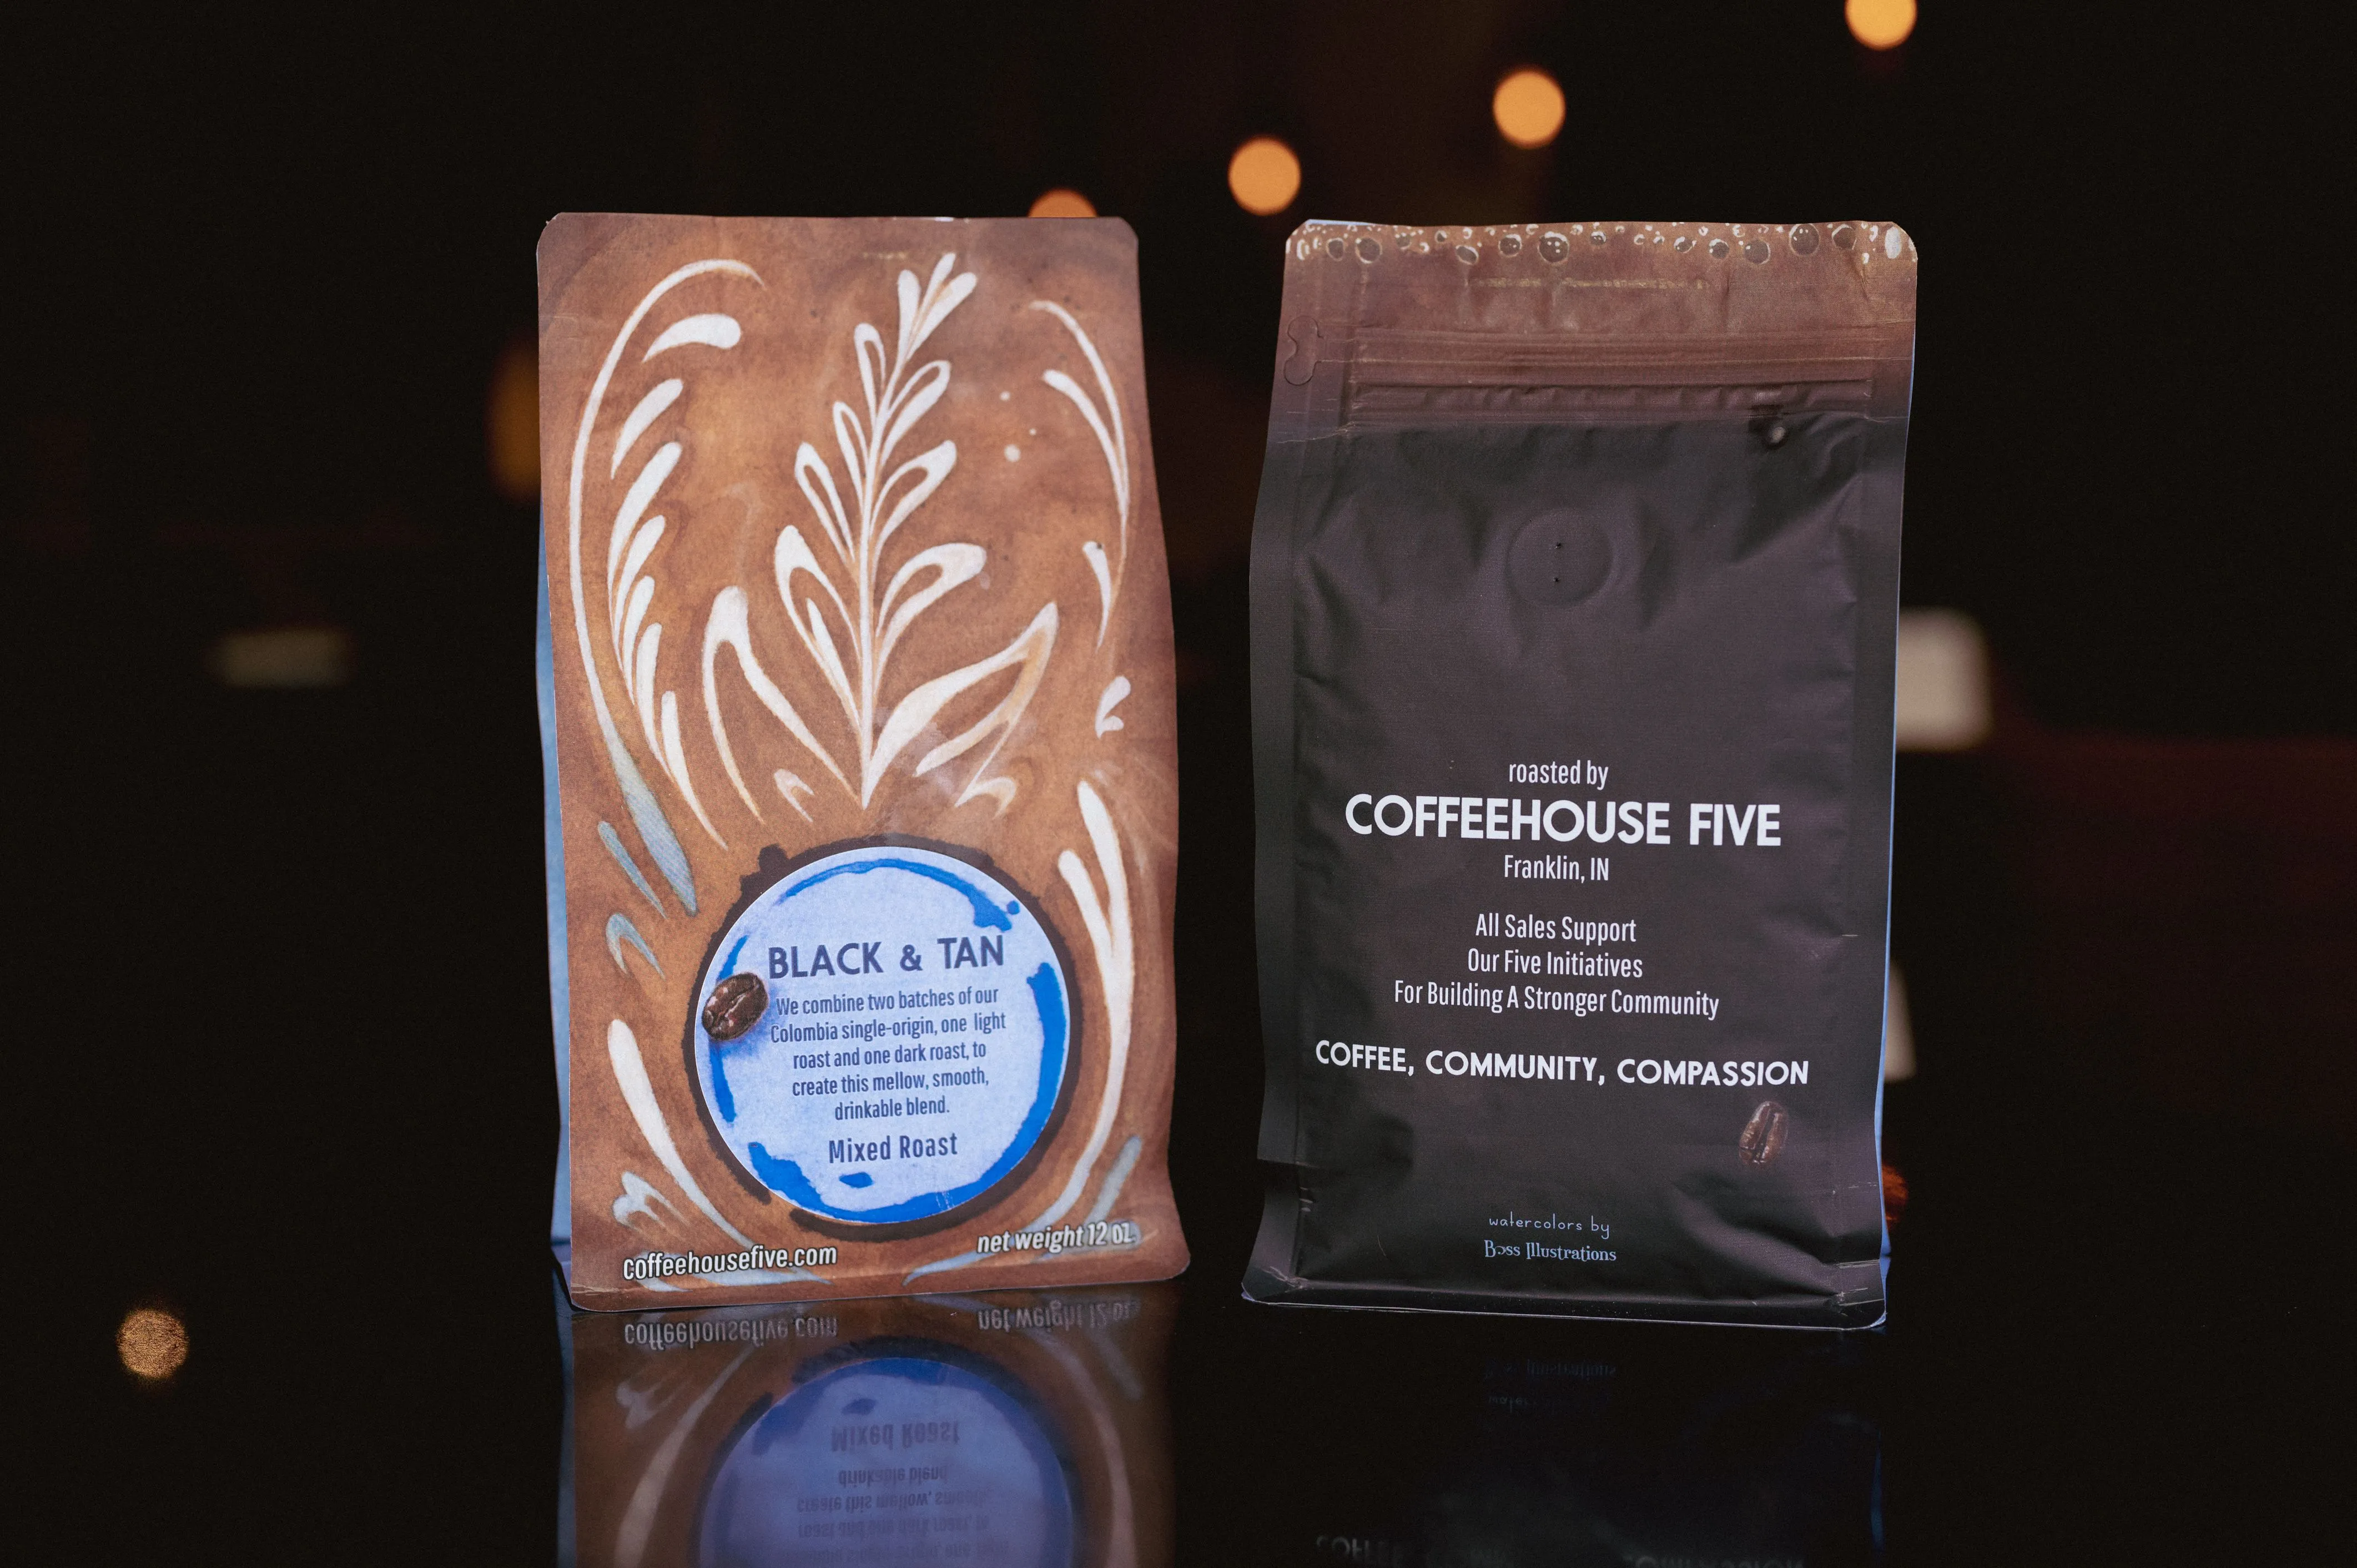 Two bags of Coffeehouse Five coffee on a reflective surface, one labeled 'Black & Tan' with a light brown design, and the other black with brand details and the words 'Coffee, Community, Compassion'.